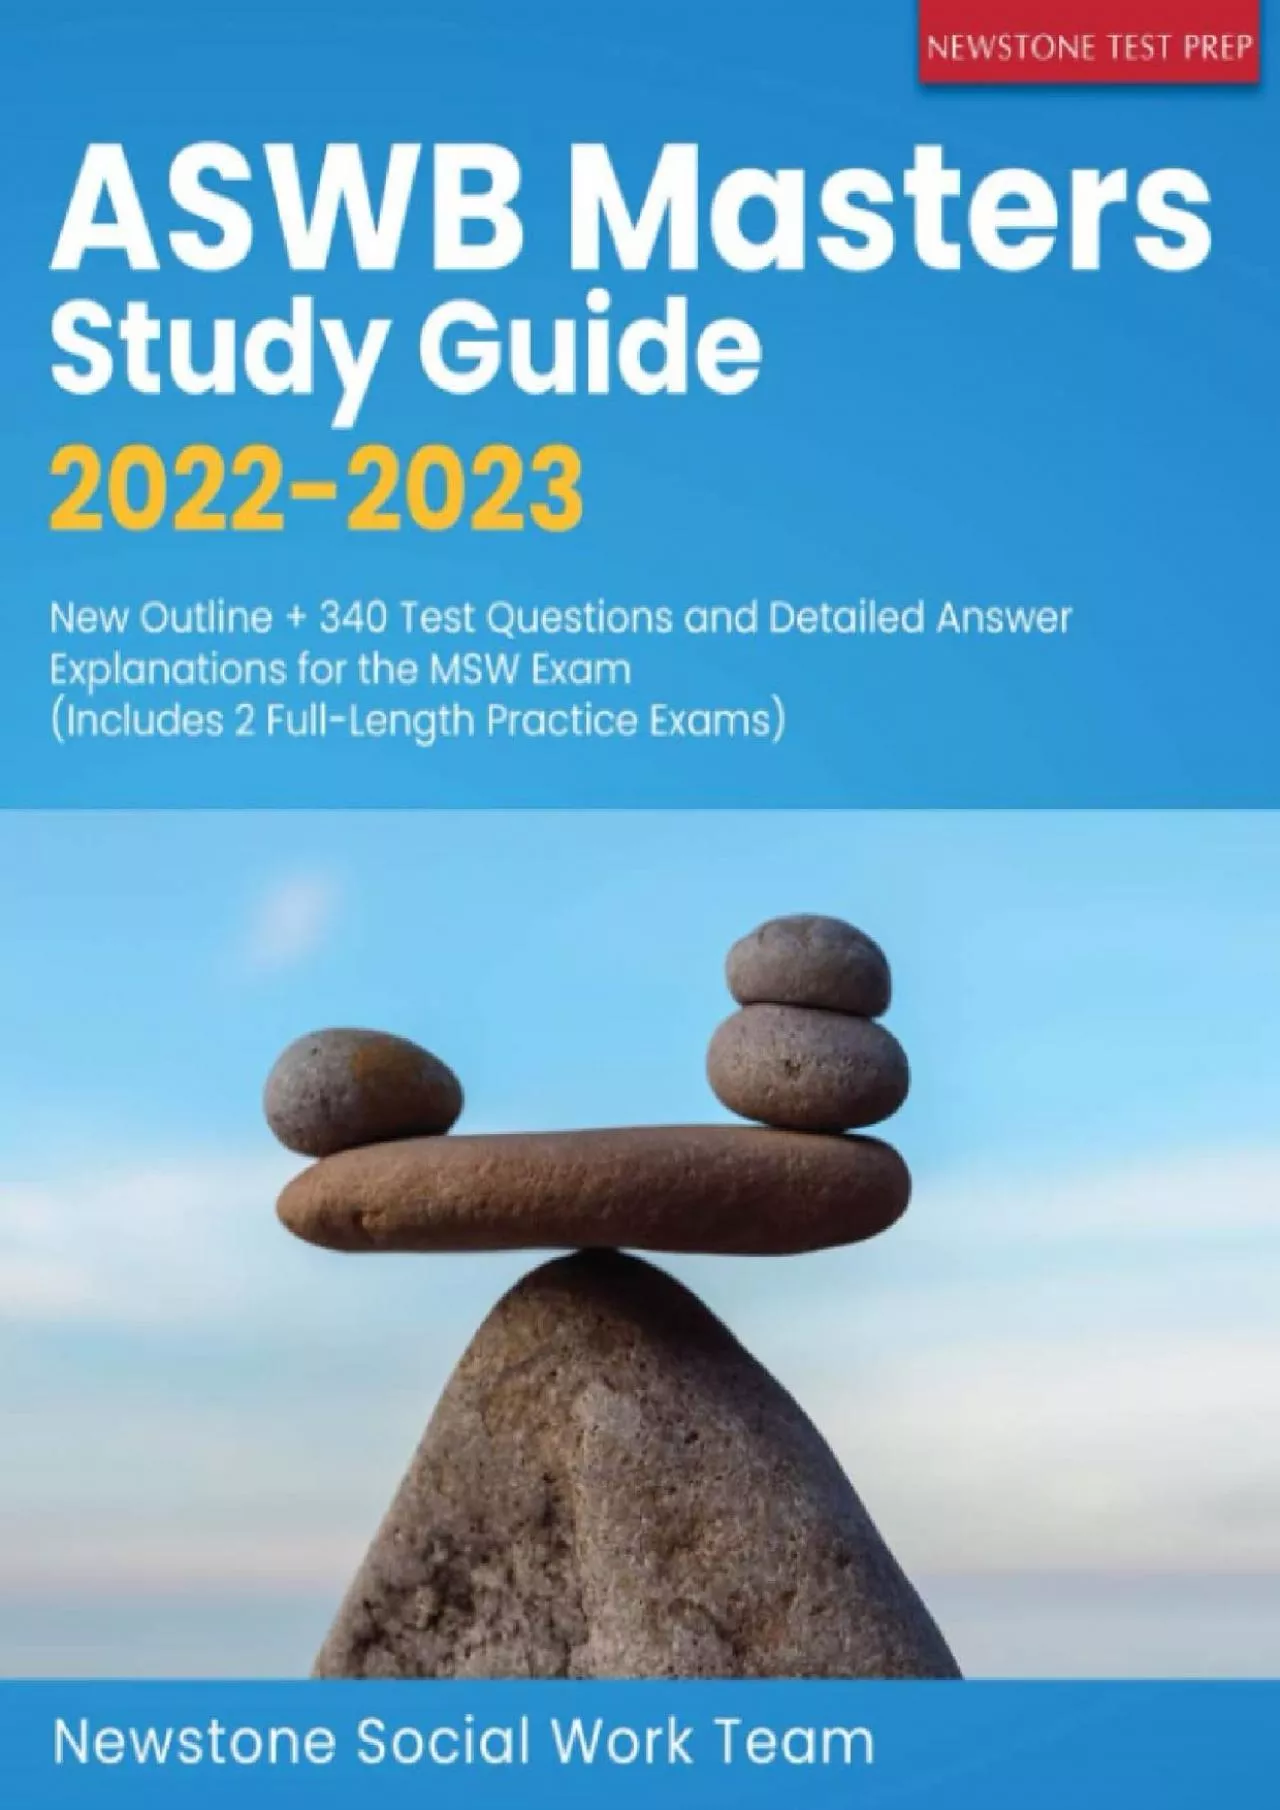 [DOWNLOAD] ASWB Masters Study Guide 2022-2023: New Outline + 340 Test Questions and Detailed